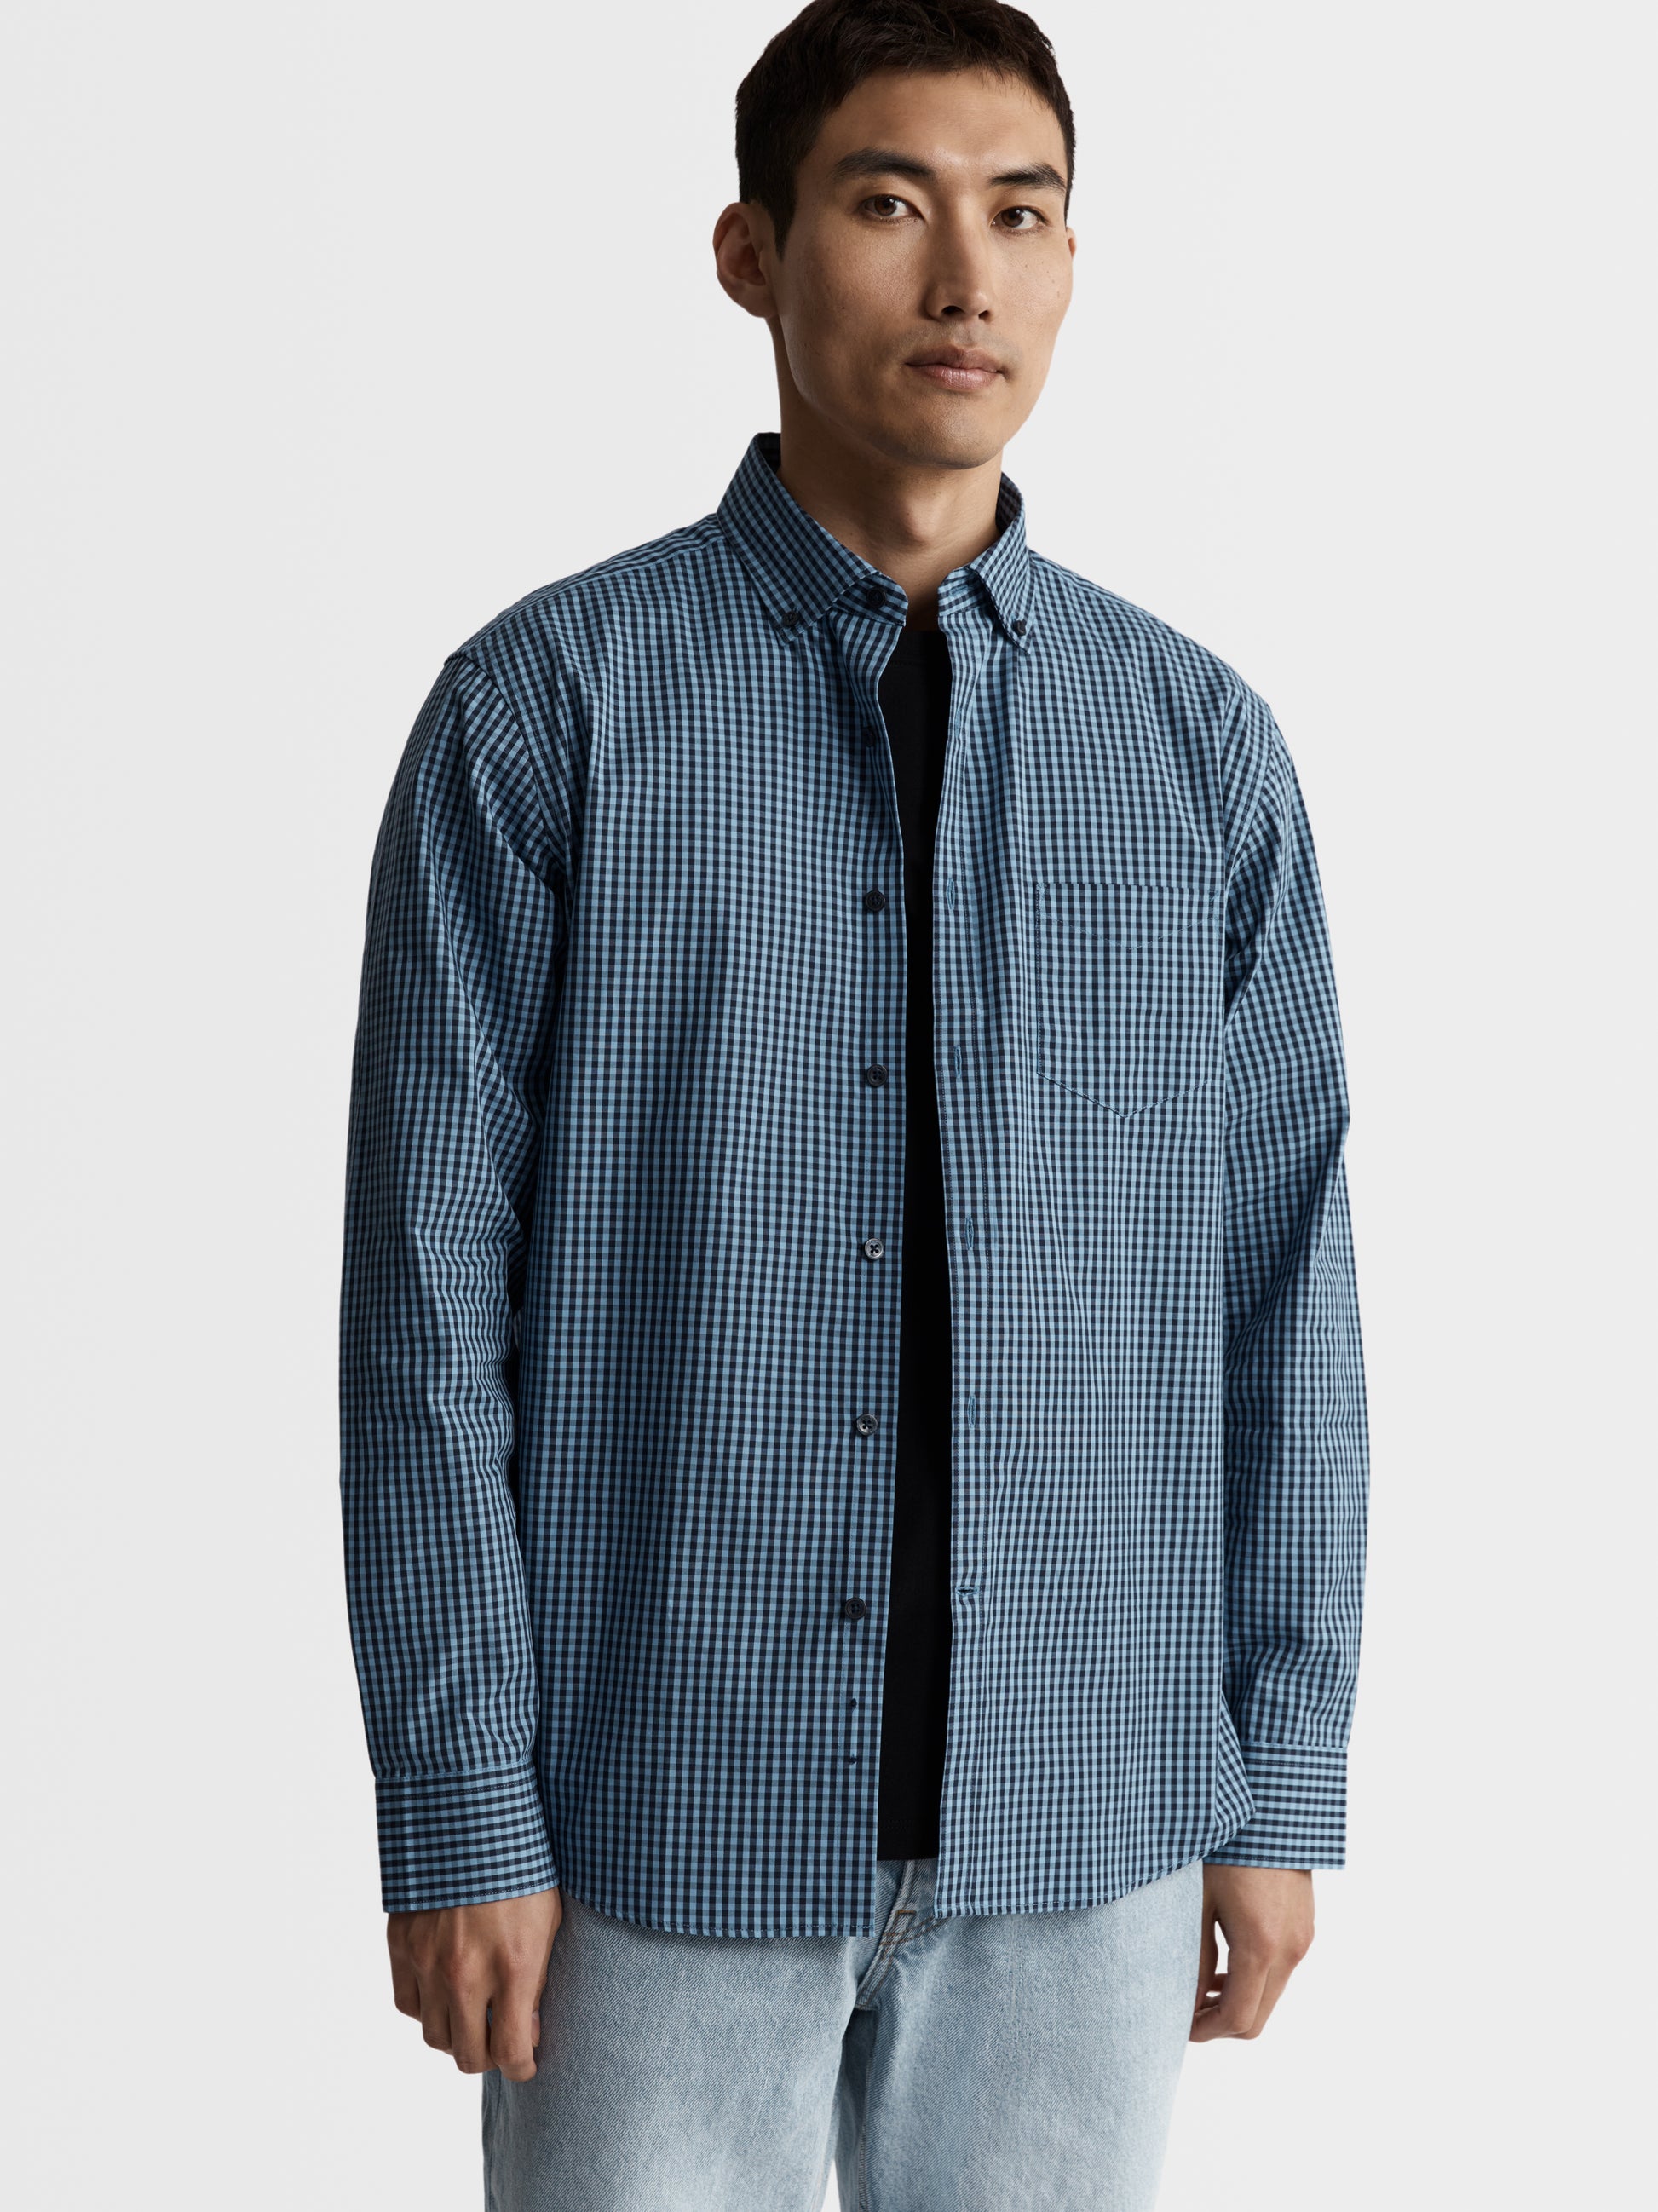 Image 2 of Slim Fit Blue and Navy Gingham Shirt